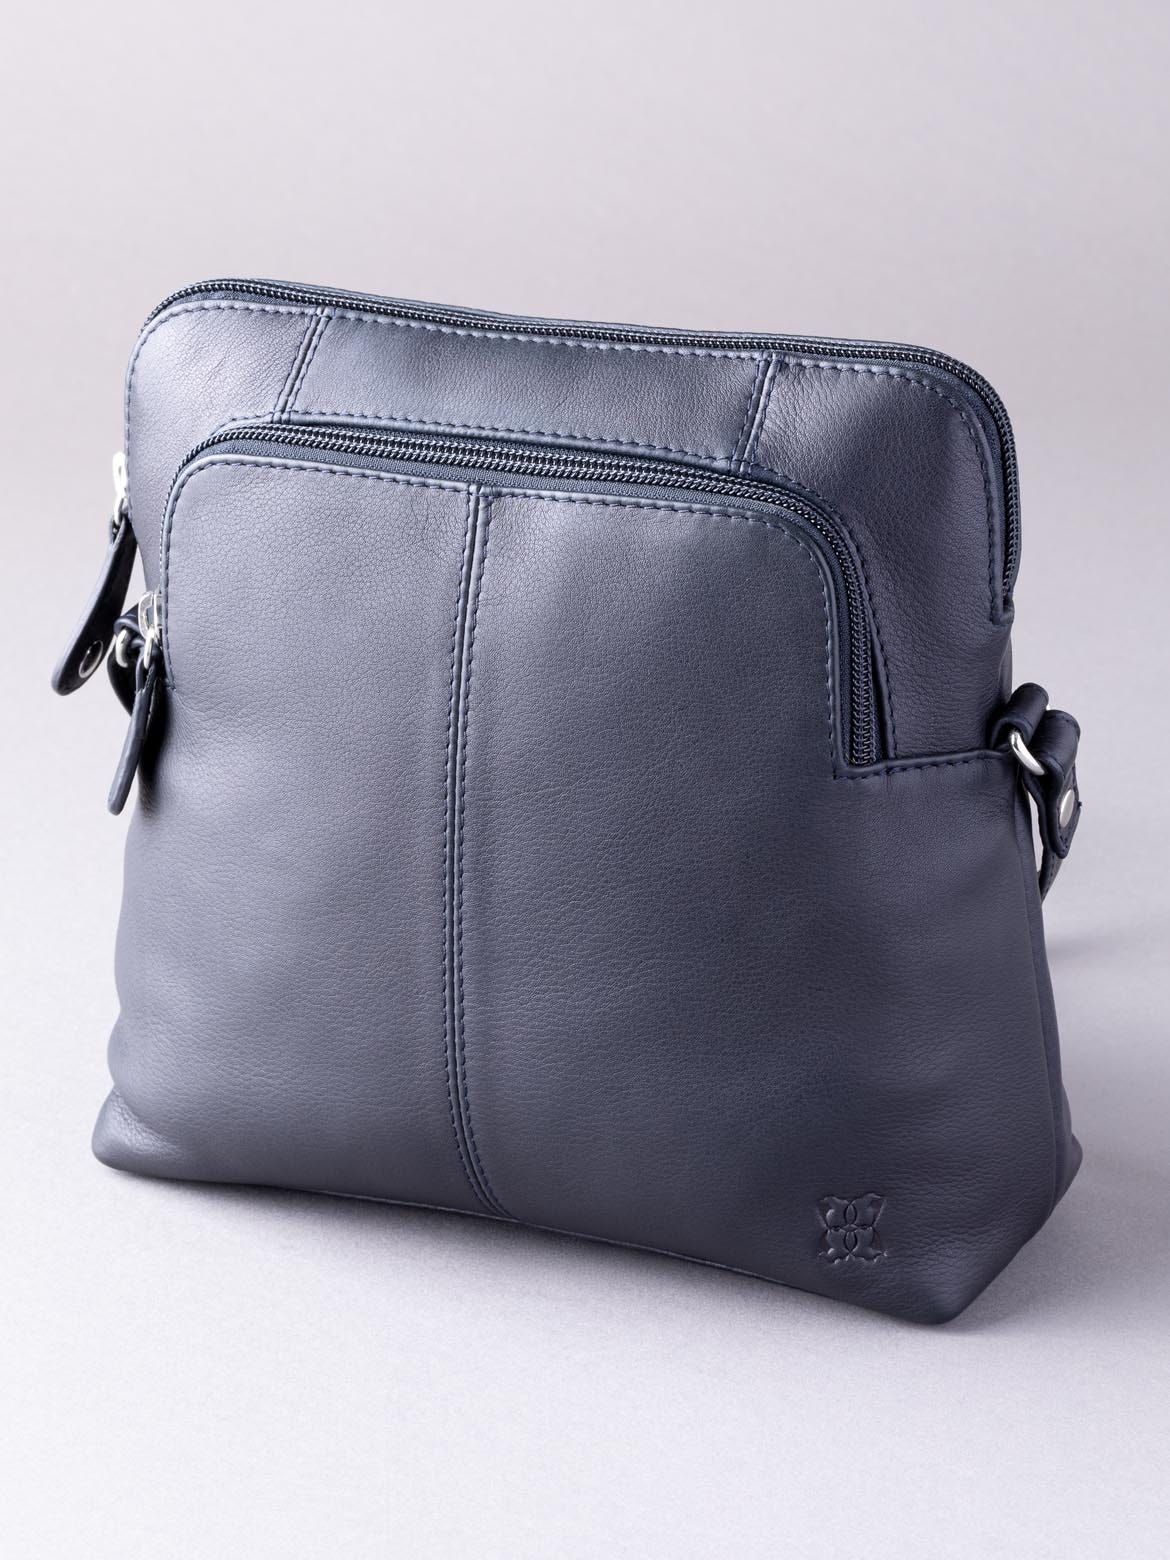 You can't argue the Raven Leather Cross Body Bag in Navy is an all-weather, all-season cross body bag. Substitute your usual handbag for this charming and functional new season update, the Raven Cross Body in Navy. Crafted using real soft quality leather, the Rachel is complete with silver tonal hardware and an adjustable strap for easy wear and styling. A versatile bag that is ideal for everyone and every day use.